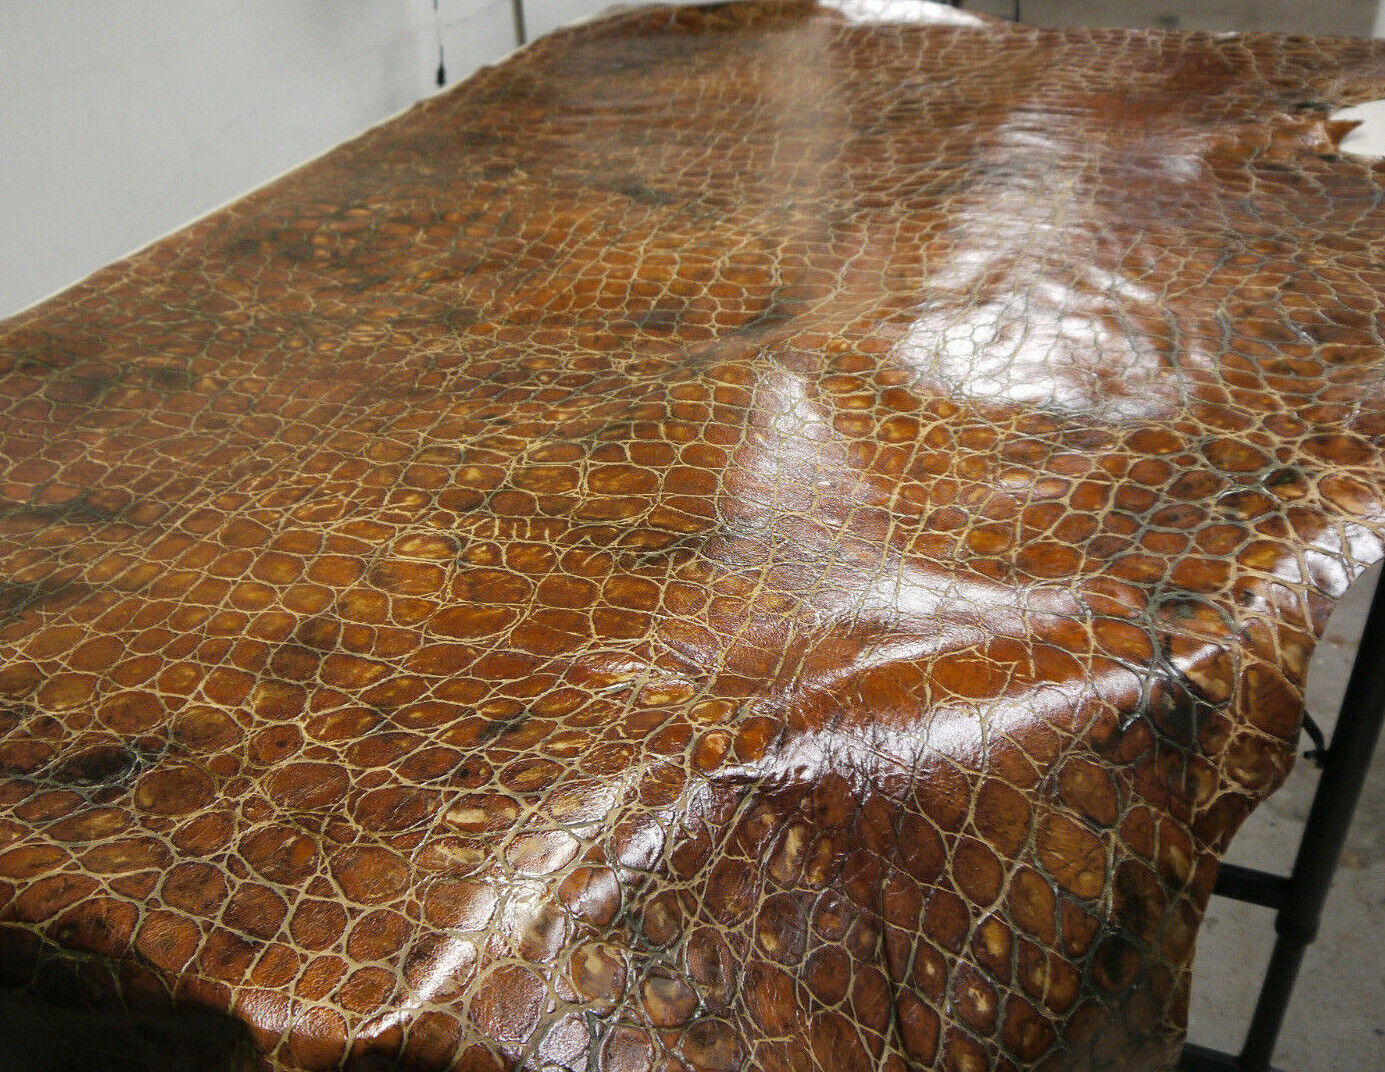 Alligator Embossed leather Hide Top Quality. 17 Square Feet